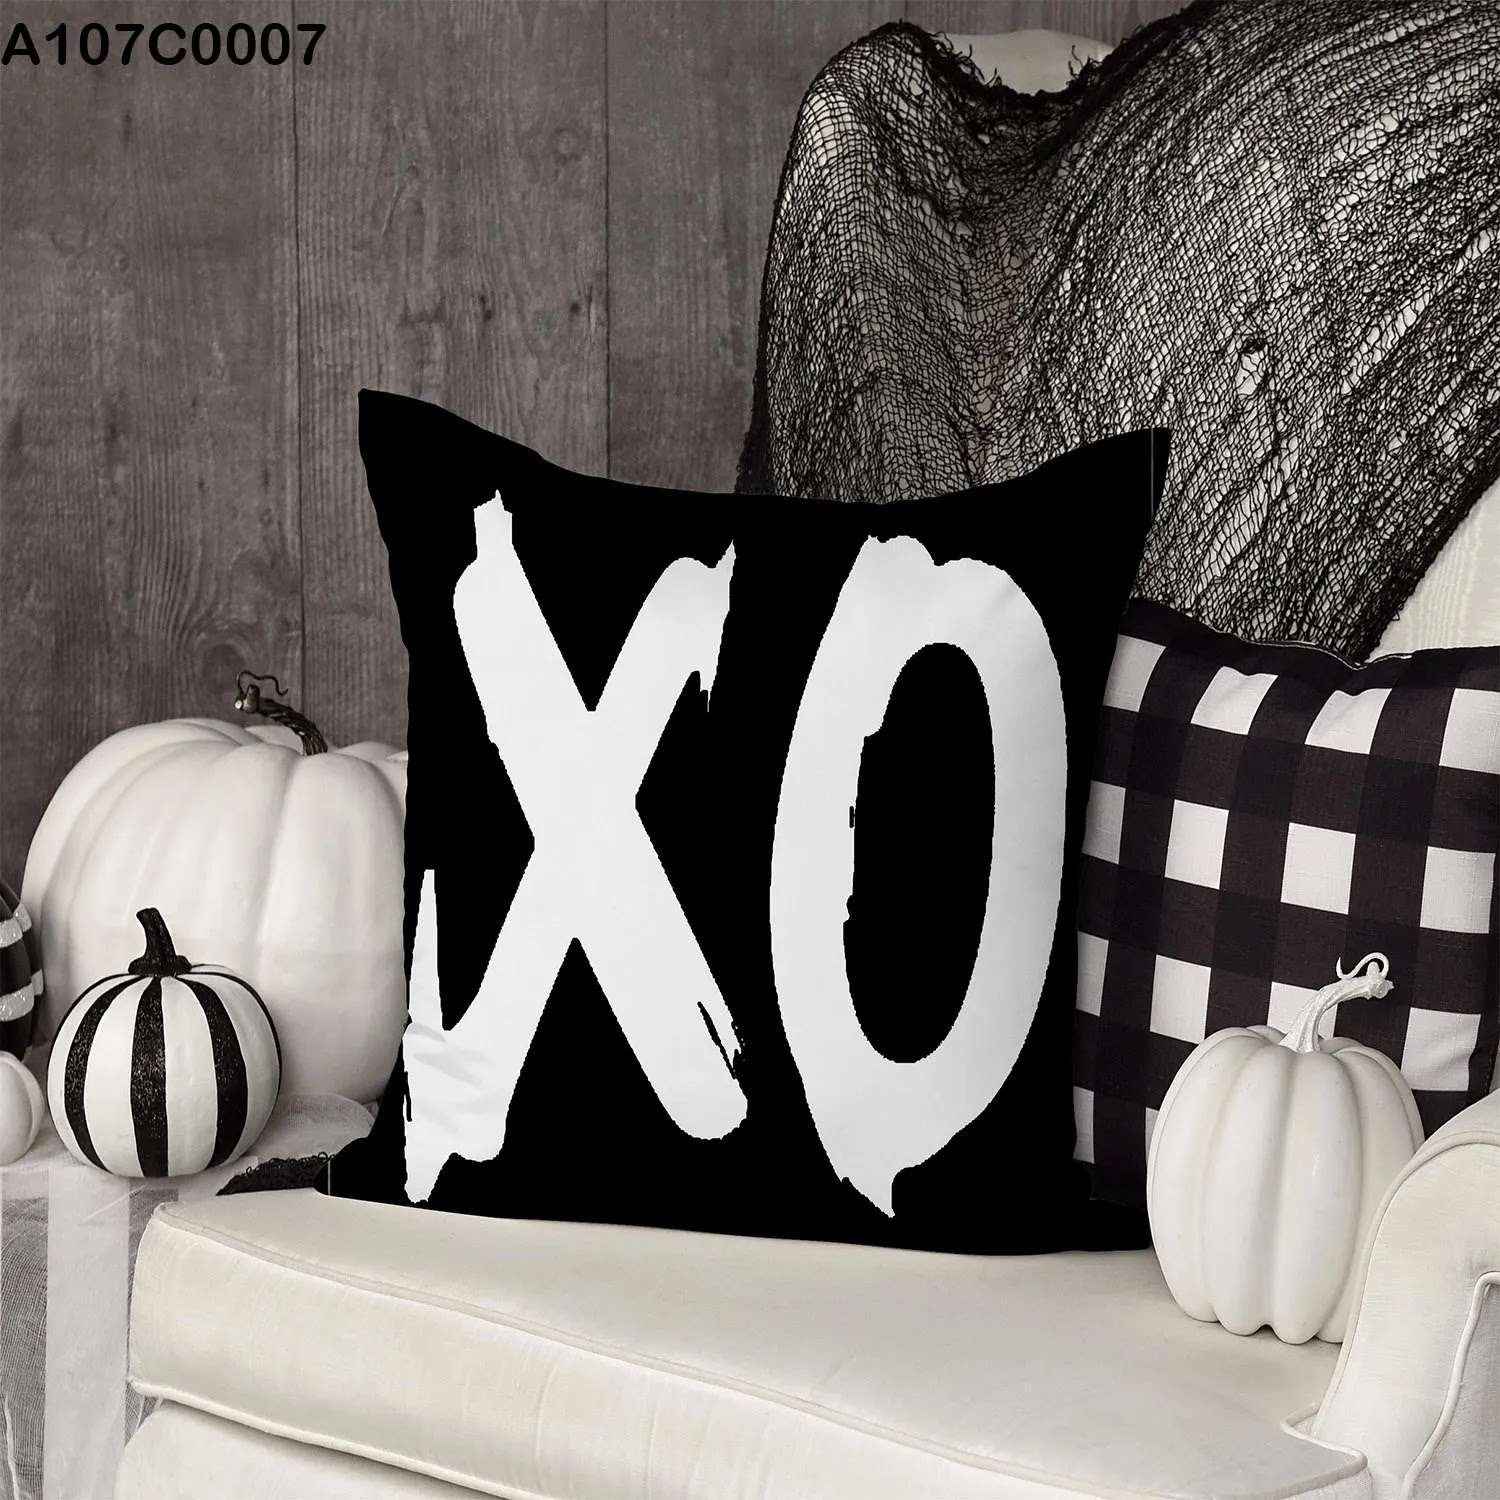 White and black pillow case with XO sign